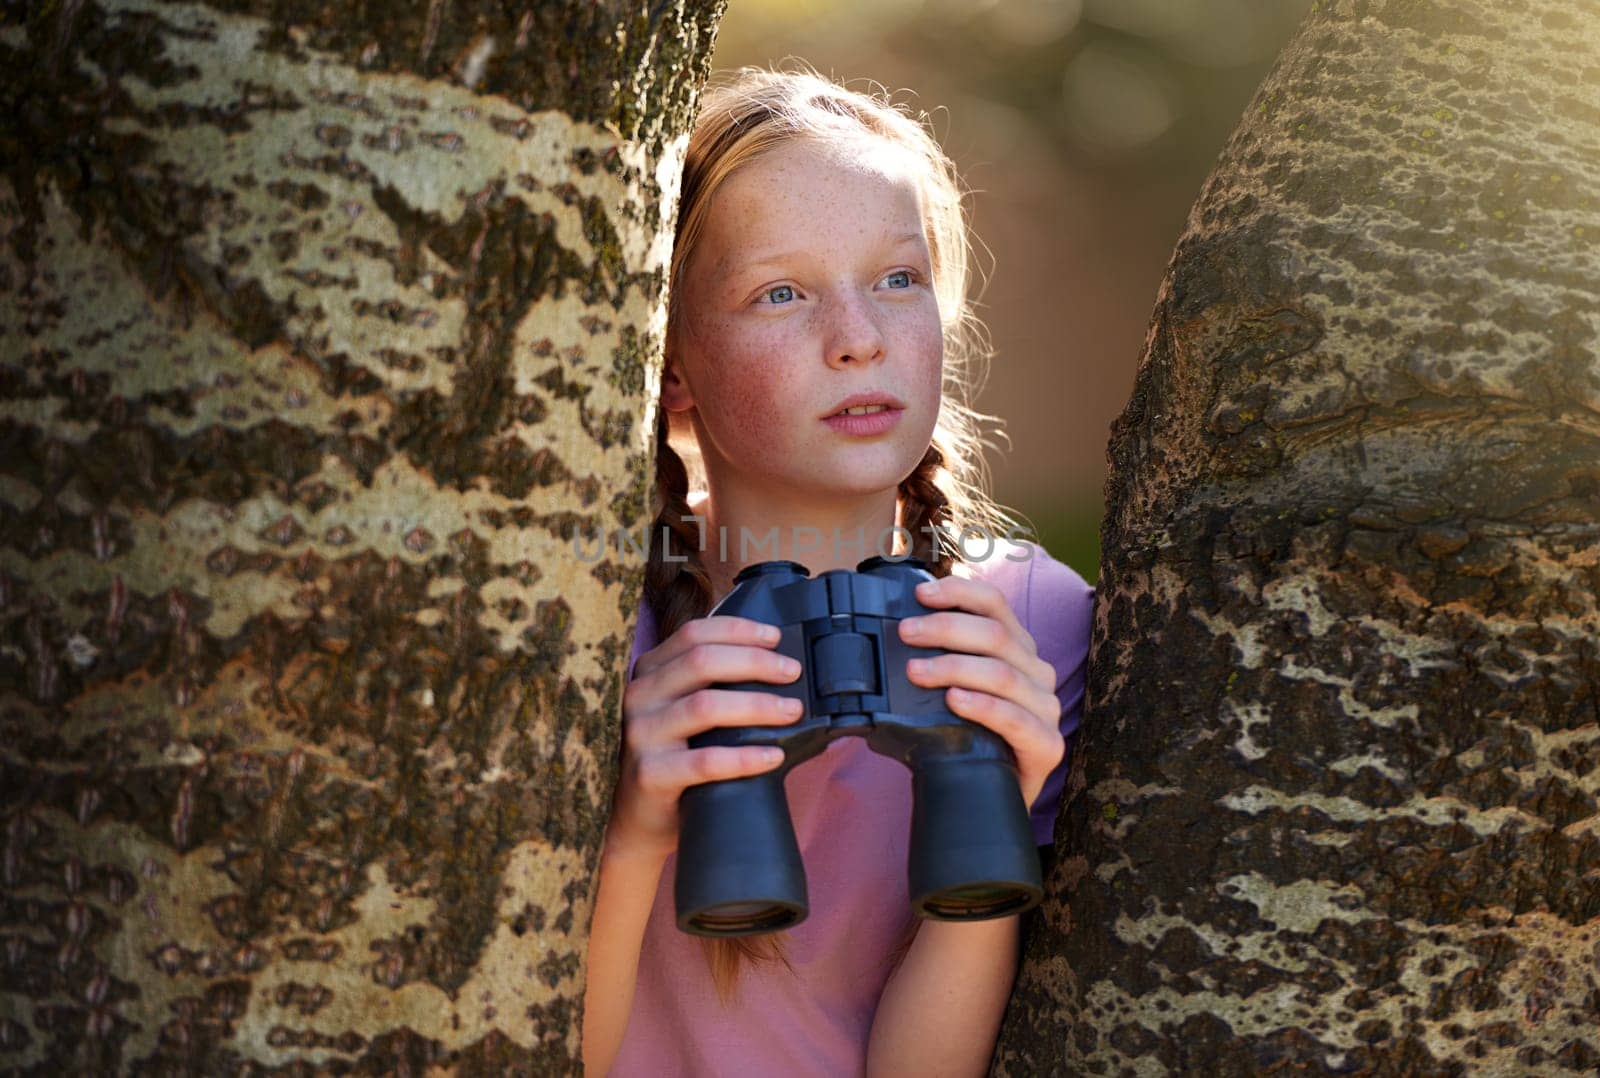 Tree, girl and binoculars for safari, search and looking for animals on travel holiday. Curious, explore and seek for bird watching or wildlife in nature, young child and scenery or view in Kenya.